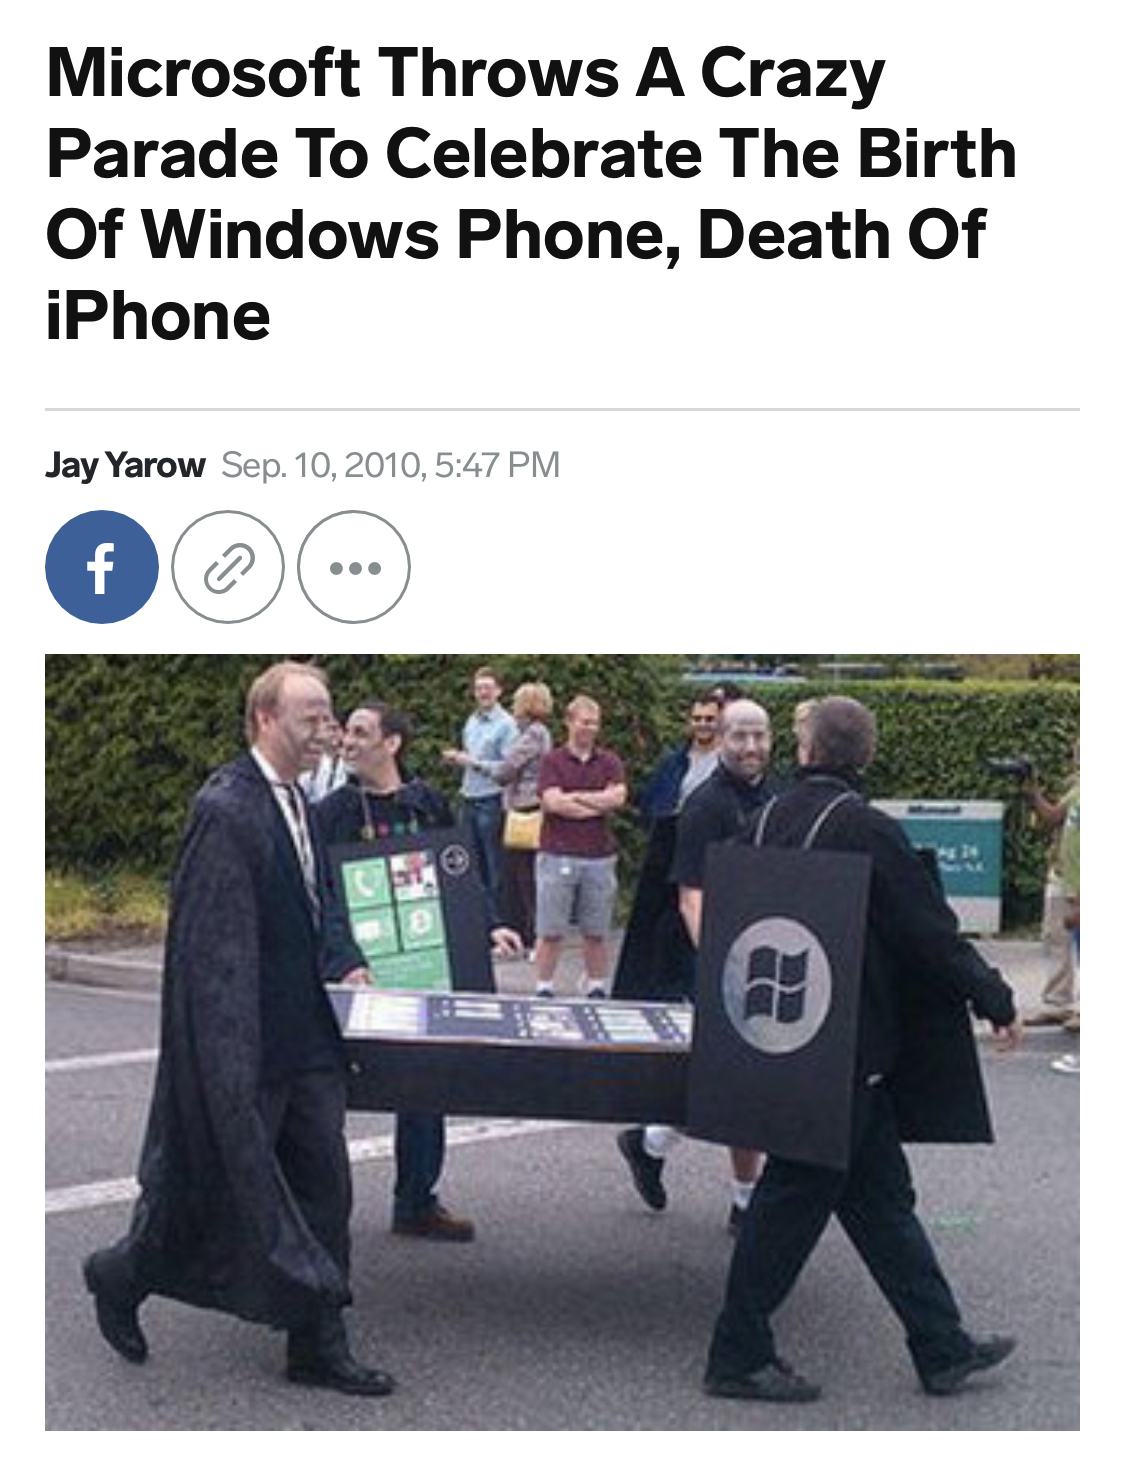 iphone funeral - Microsoft Throws A Crazy Parade To Celebrate The Birth Of Windows Phone, Death Of iPhone Jay Yarow ,